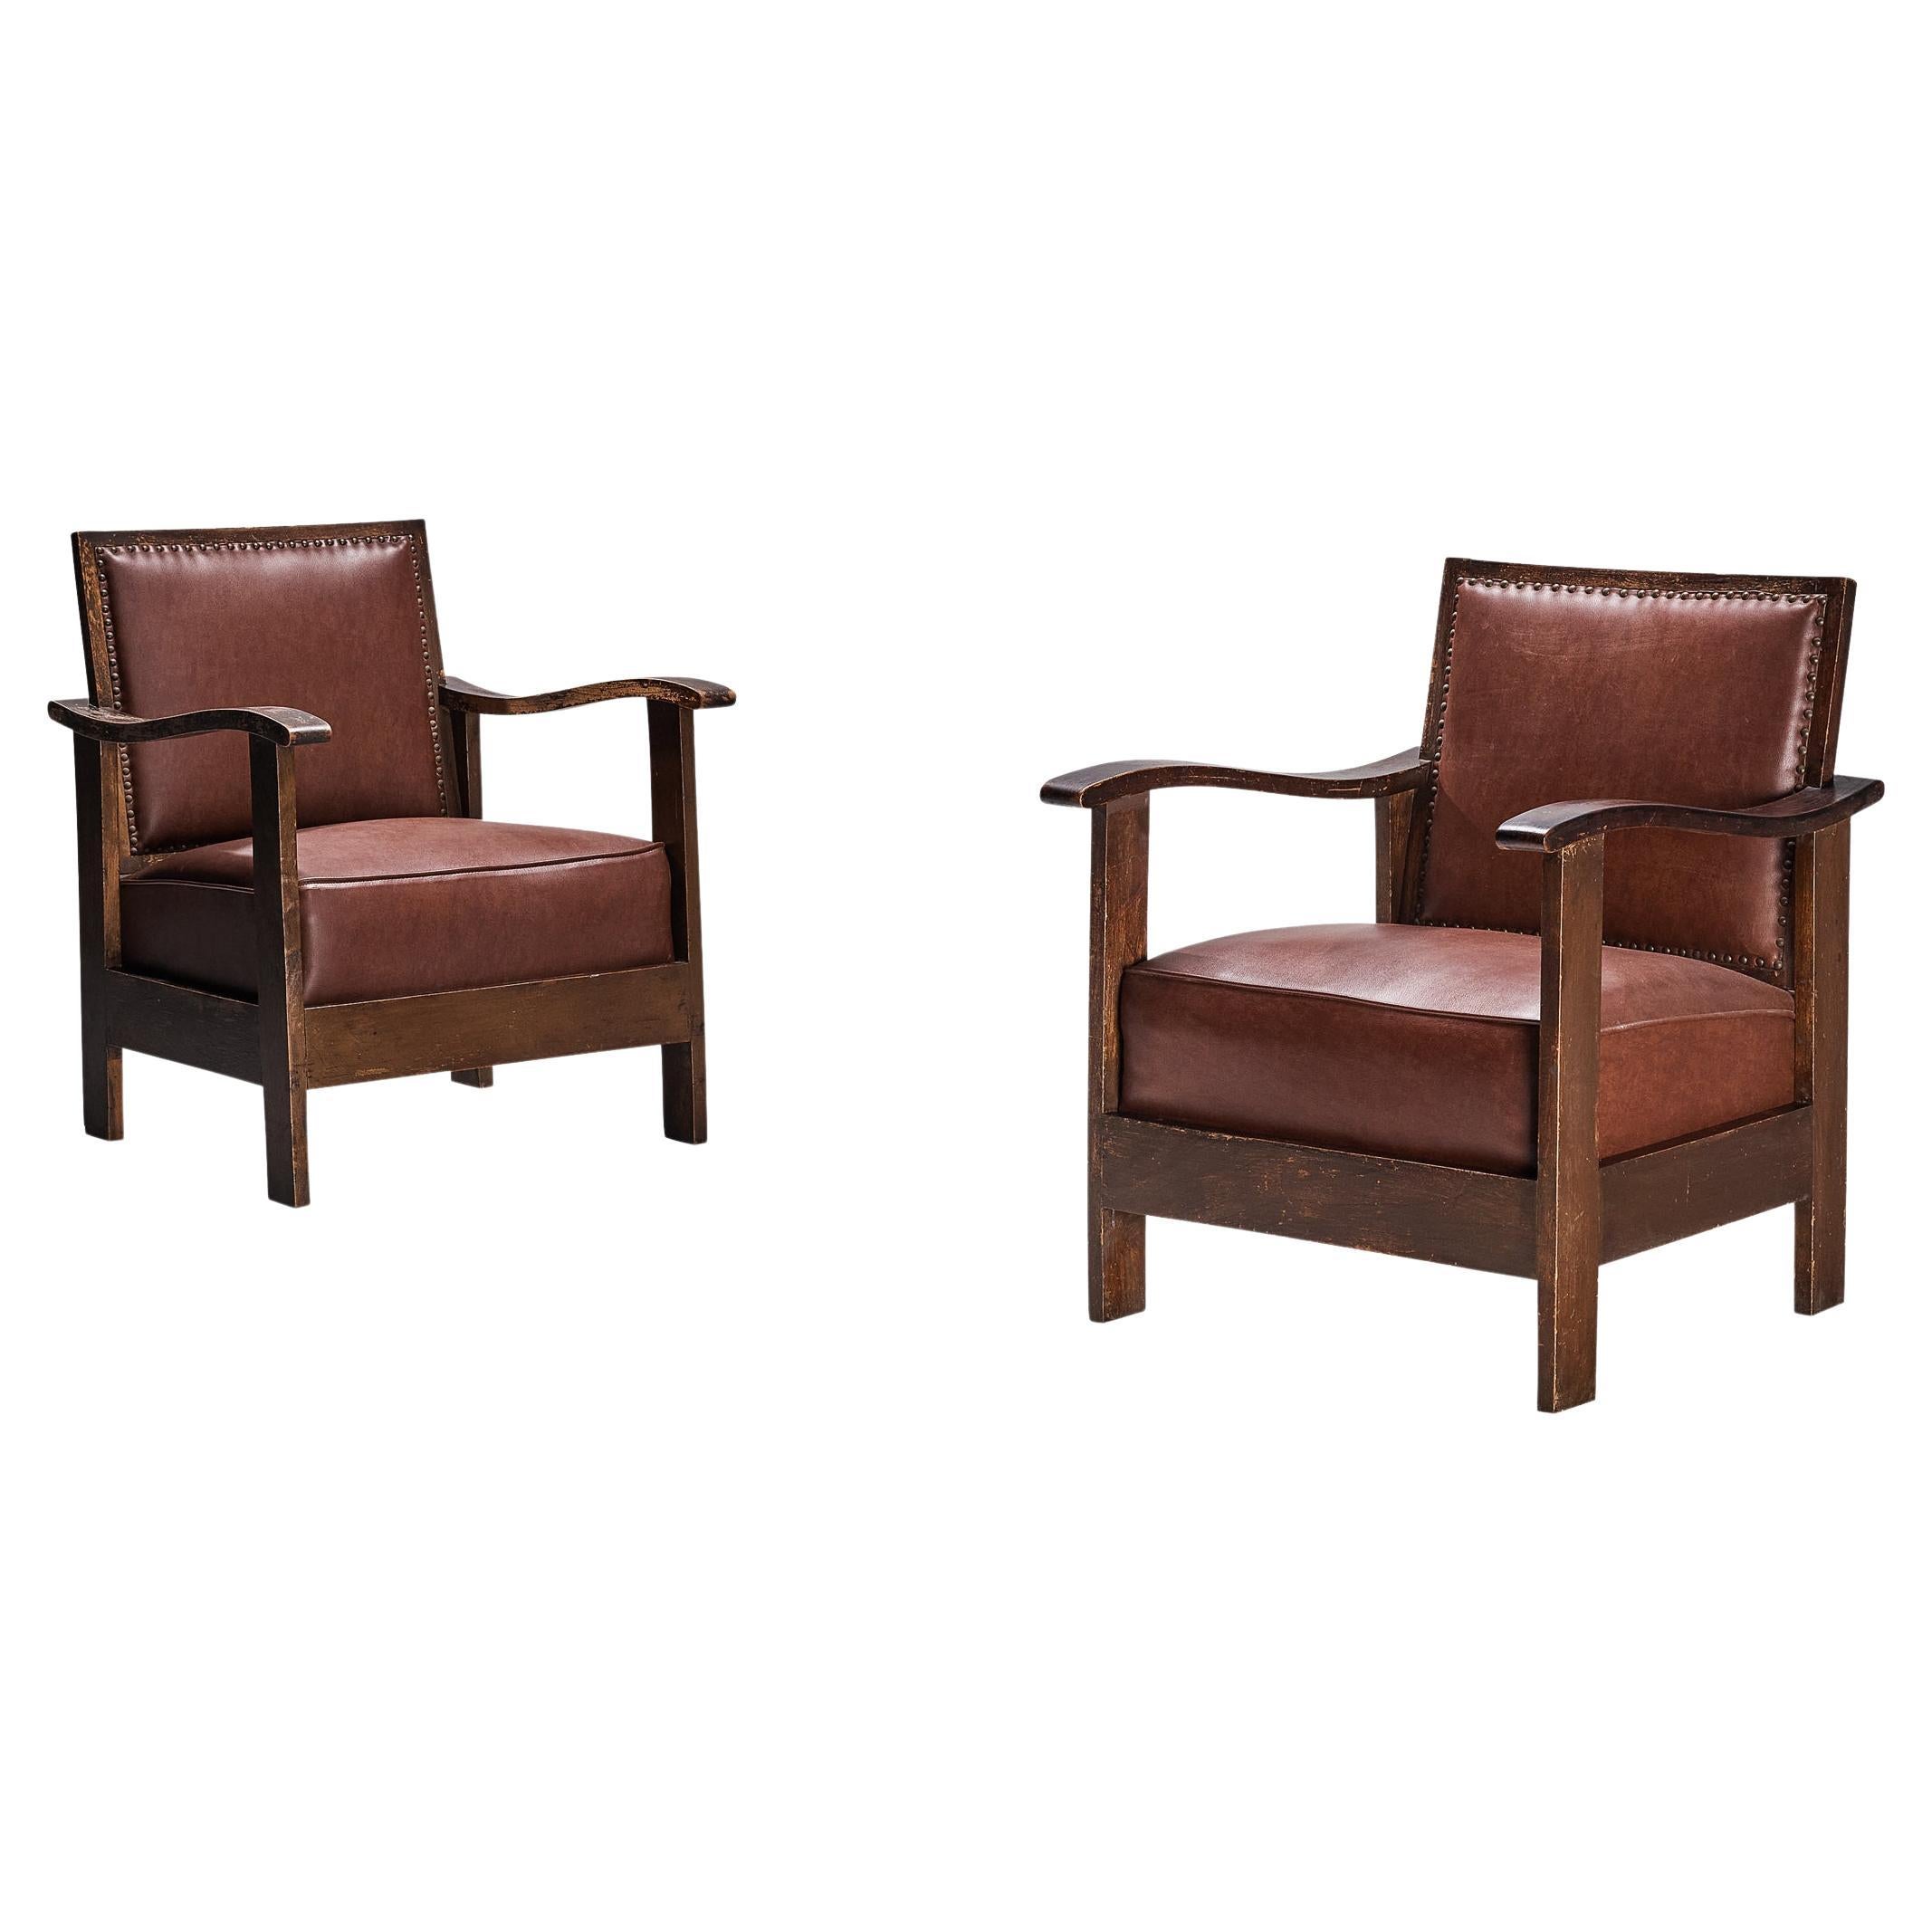 Josep Palau Oller Spanish Pair of Armchairs in Brown Leather  For Sale